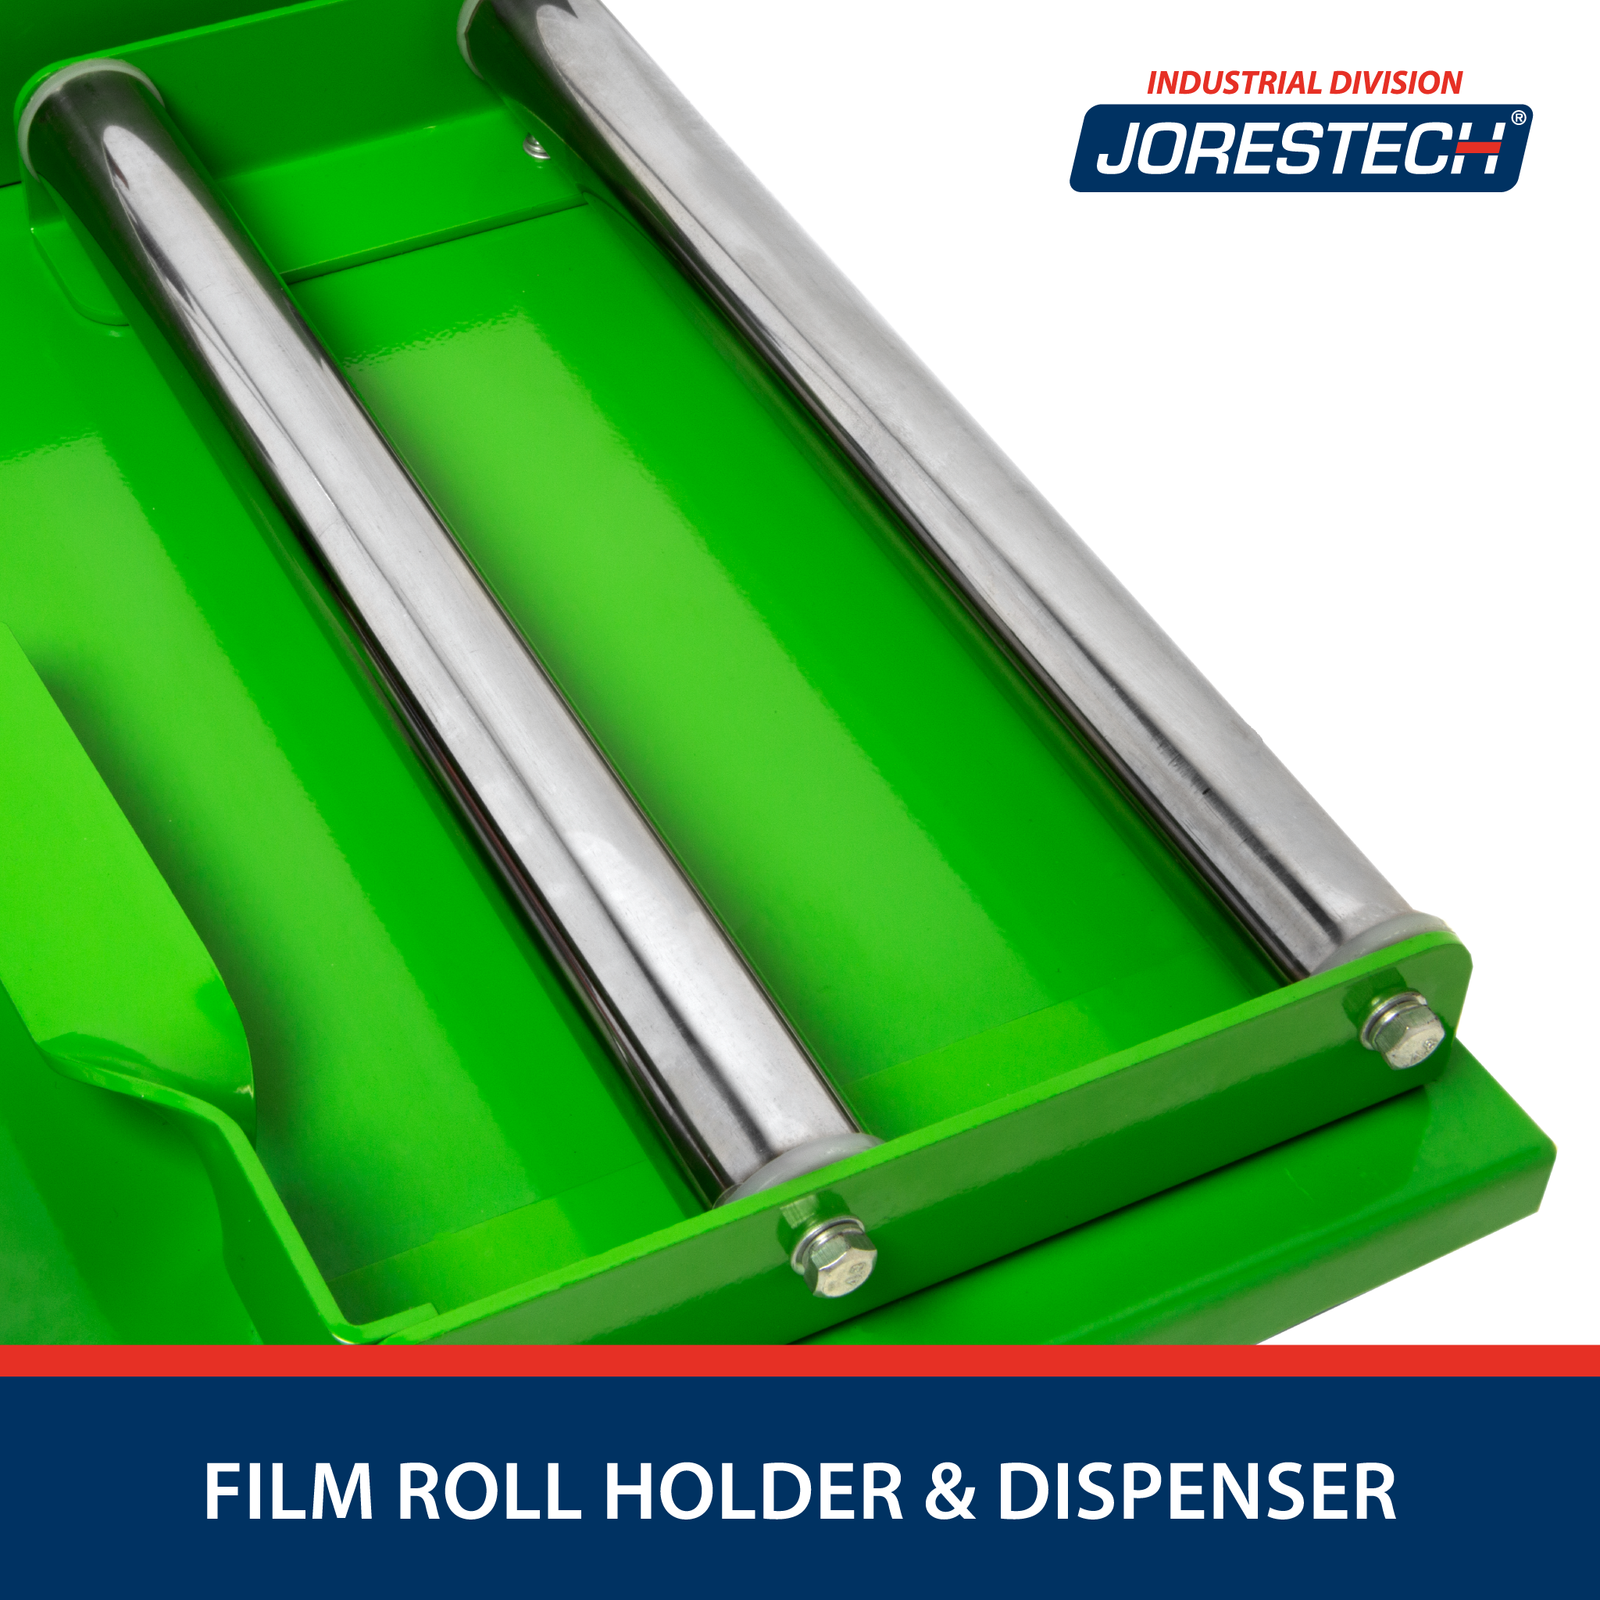 Close-up of the shrink roll holder bars on a shrink wrapping film dispenser and sealer machine. Text on the bottom reads “Film Roll Holder & Dispenser”.